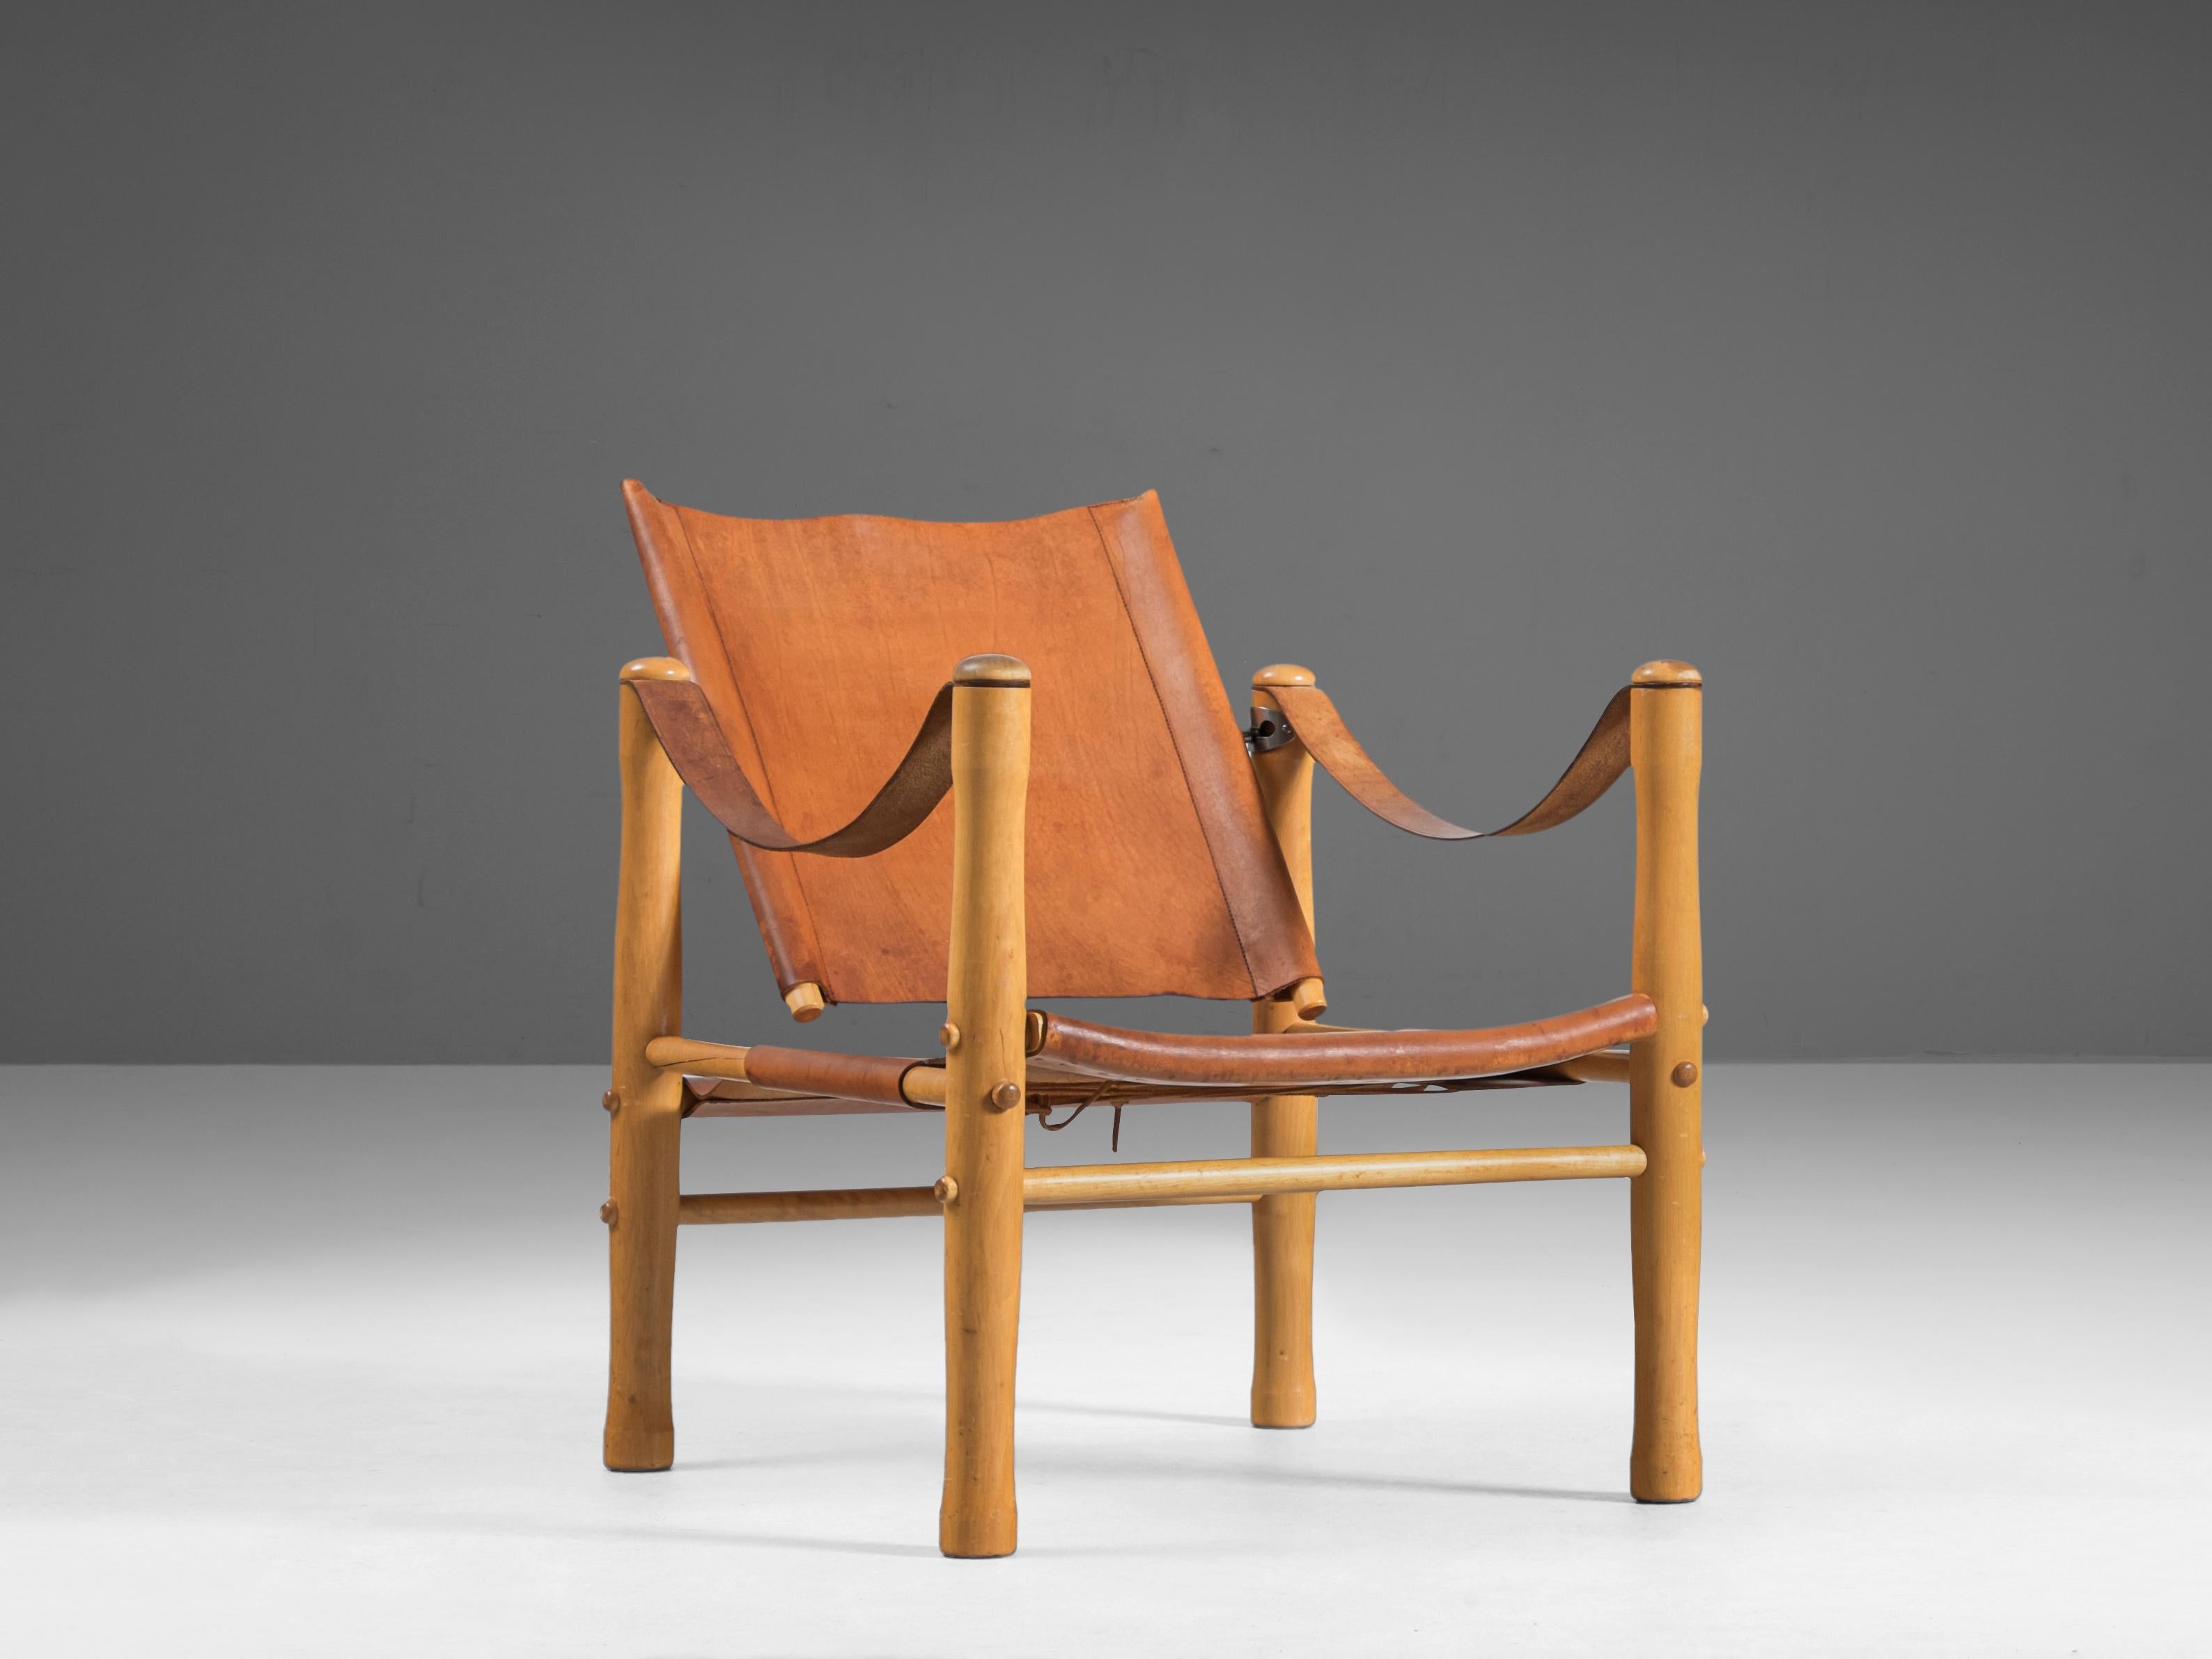 Nordiska Kompaniet, armchair, leather, birch, Sweden, 1950s

This elegant safari lounge chair is crafted from natural cognac brown leather, which has developed a beautiful patina over time, adding to the chair's character. The well-designed lines of